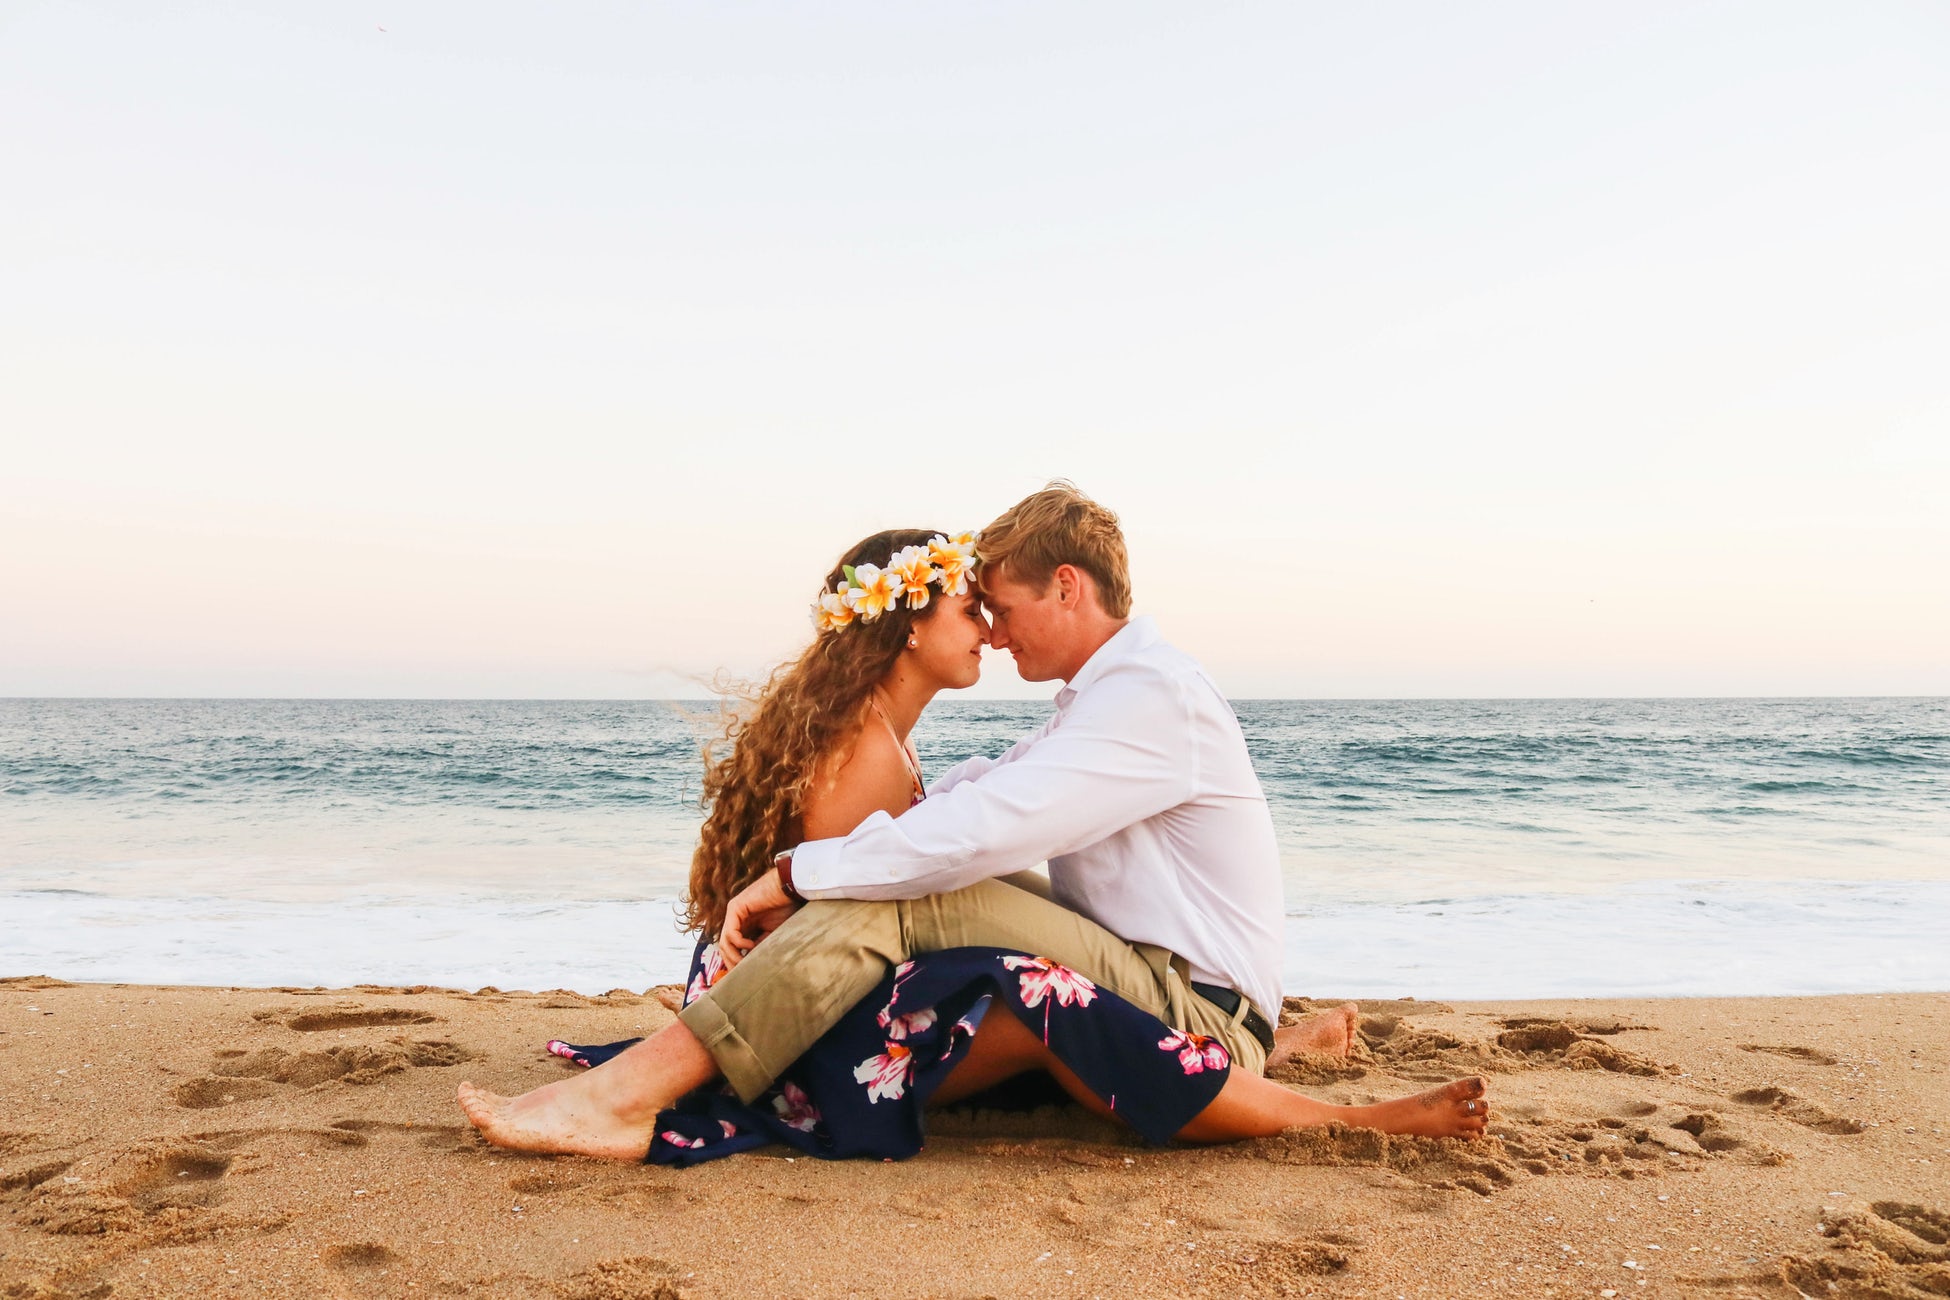 Shot of couple in embrace on beach